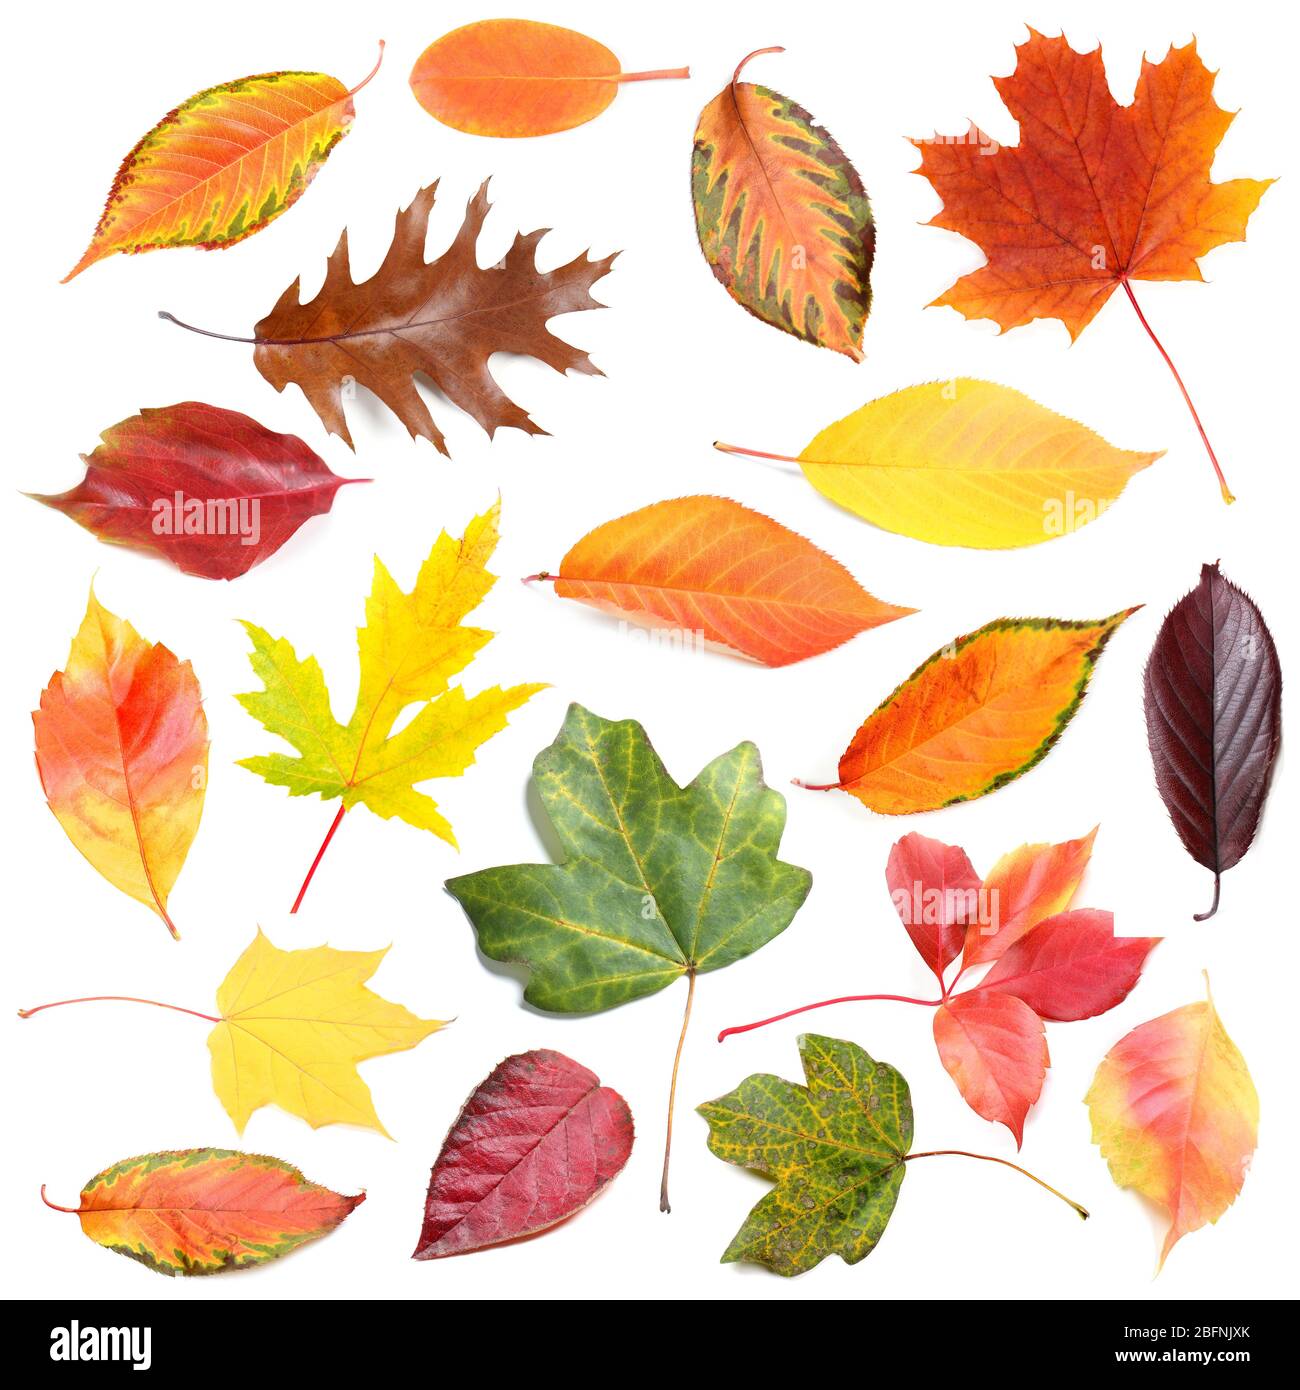 Collection of fallen leaves on white background Stock Photo - Alamy